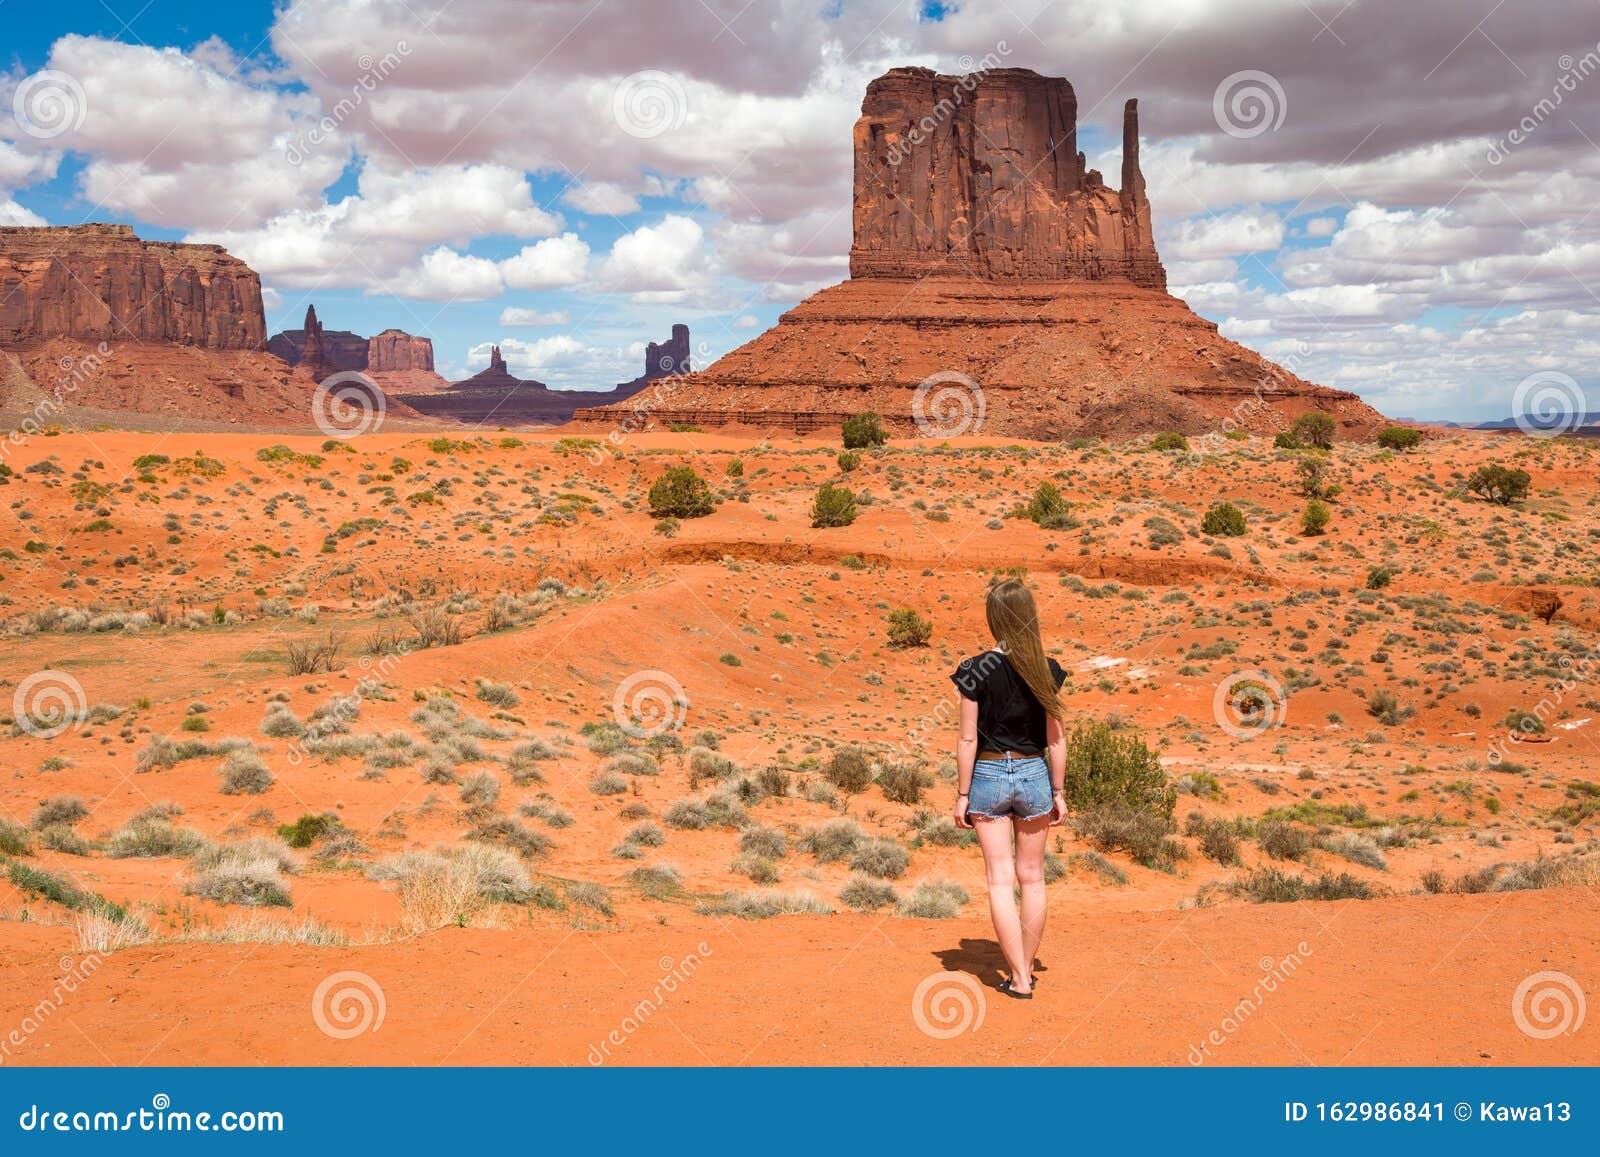 Famous Red Rocks Monument Valley. USA Stock Image - Image of landmark, monument: 162986841